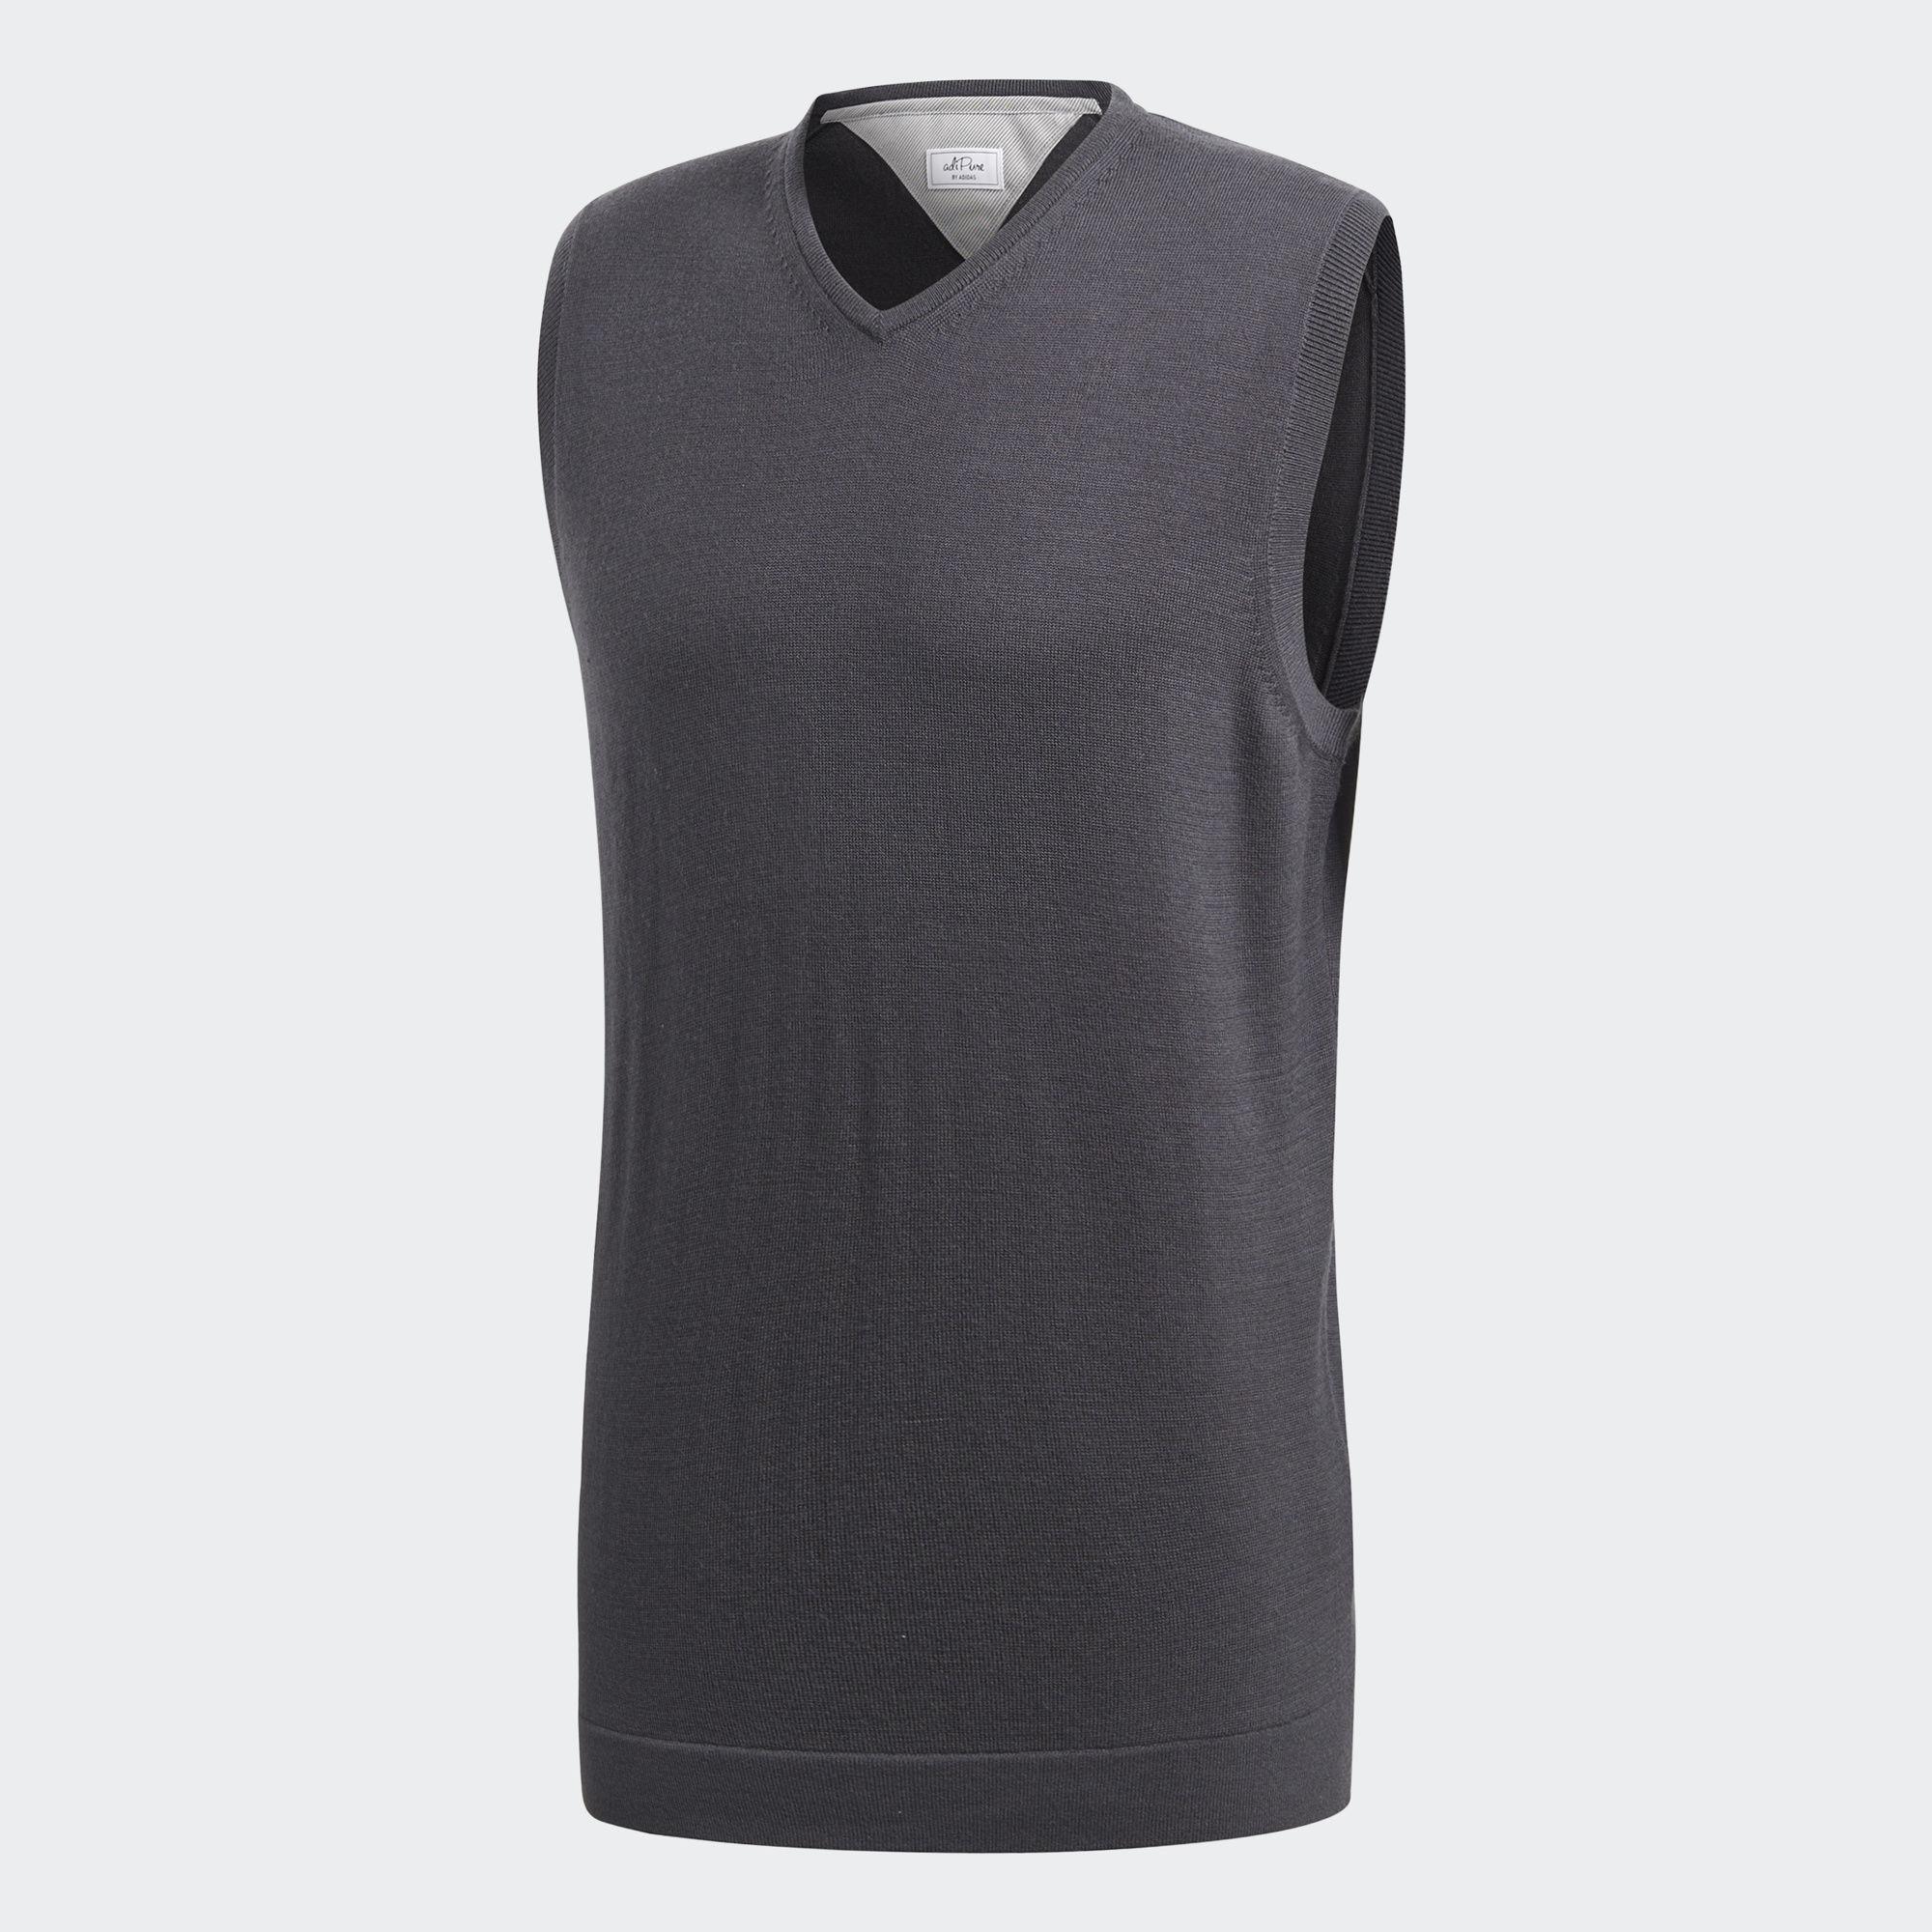 adidas Wool Adipure Sweater Vest in Black for Men - Lyst